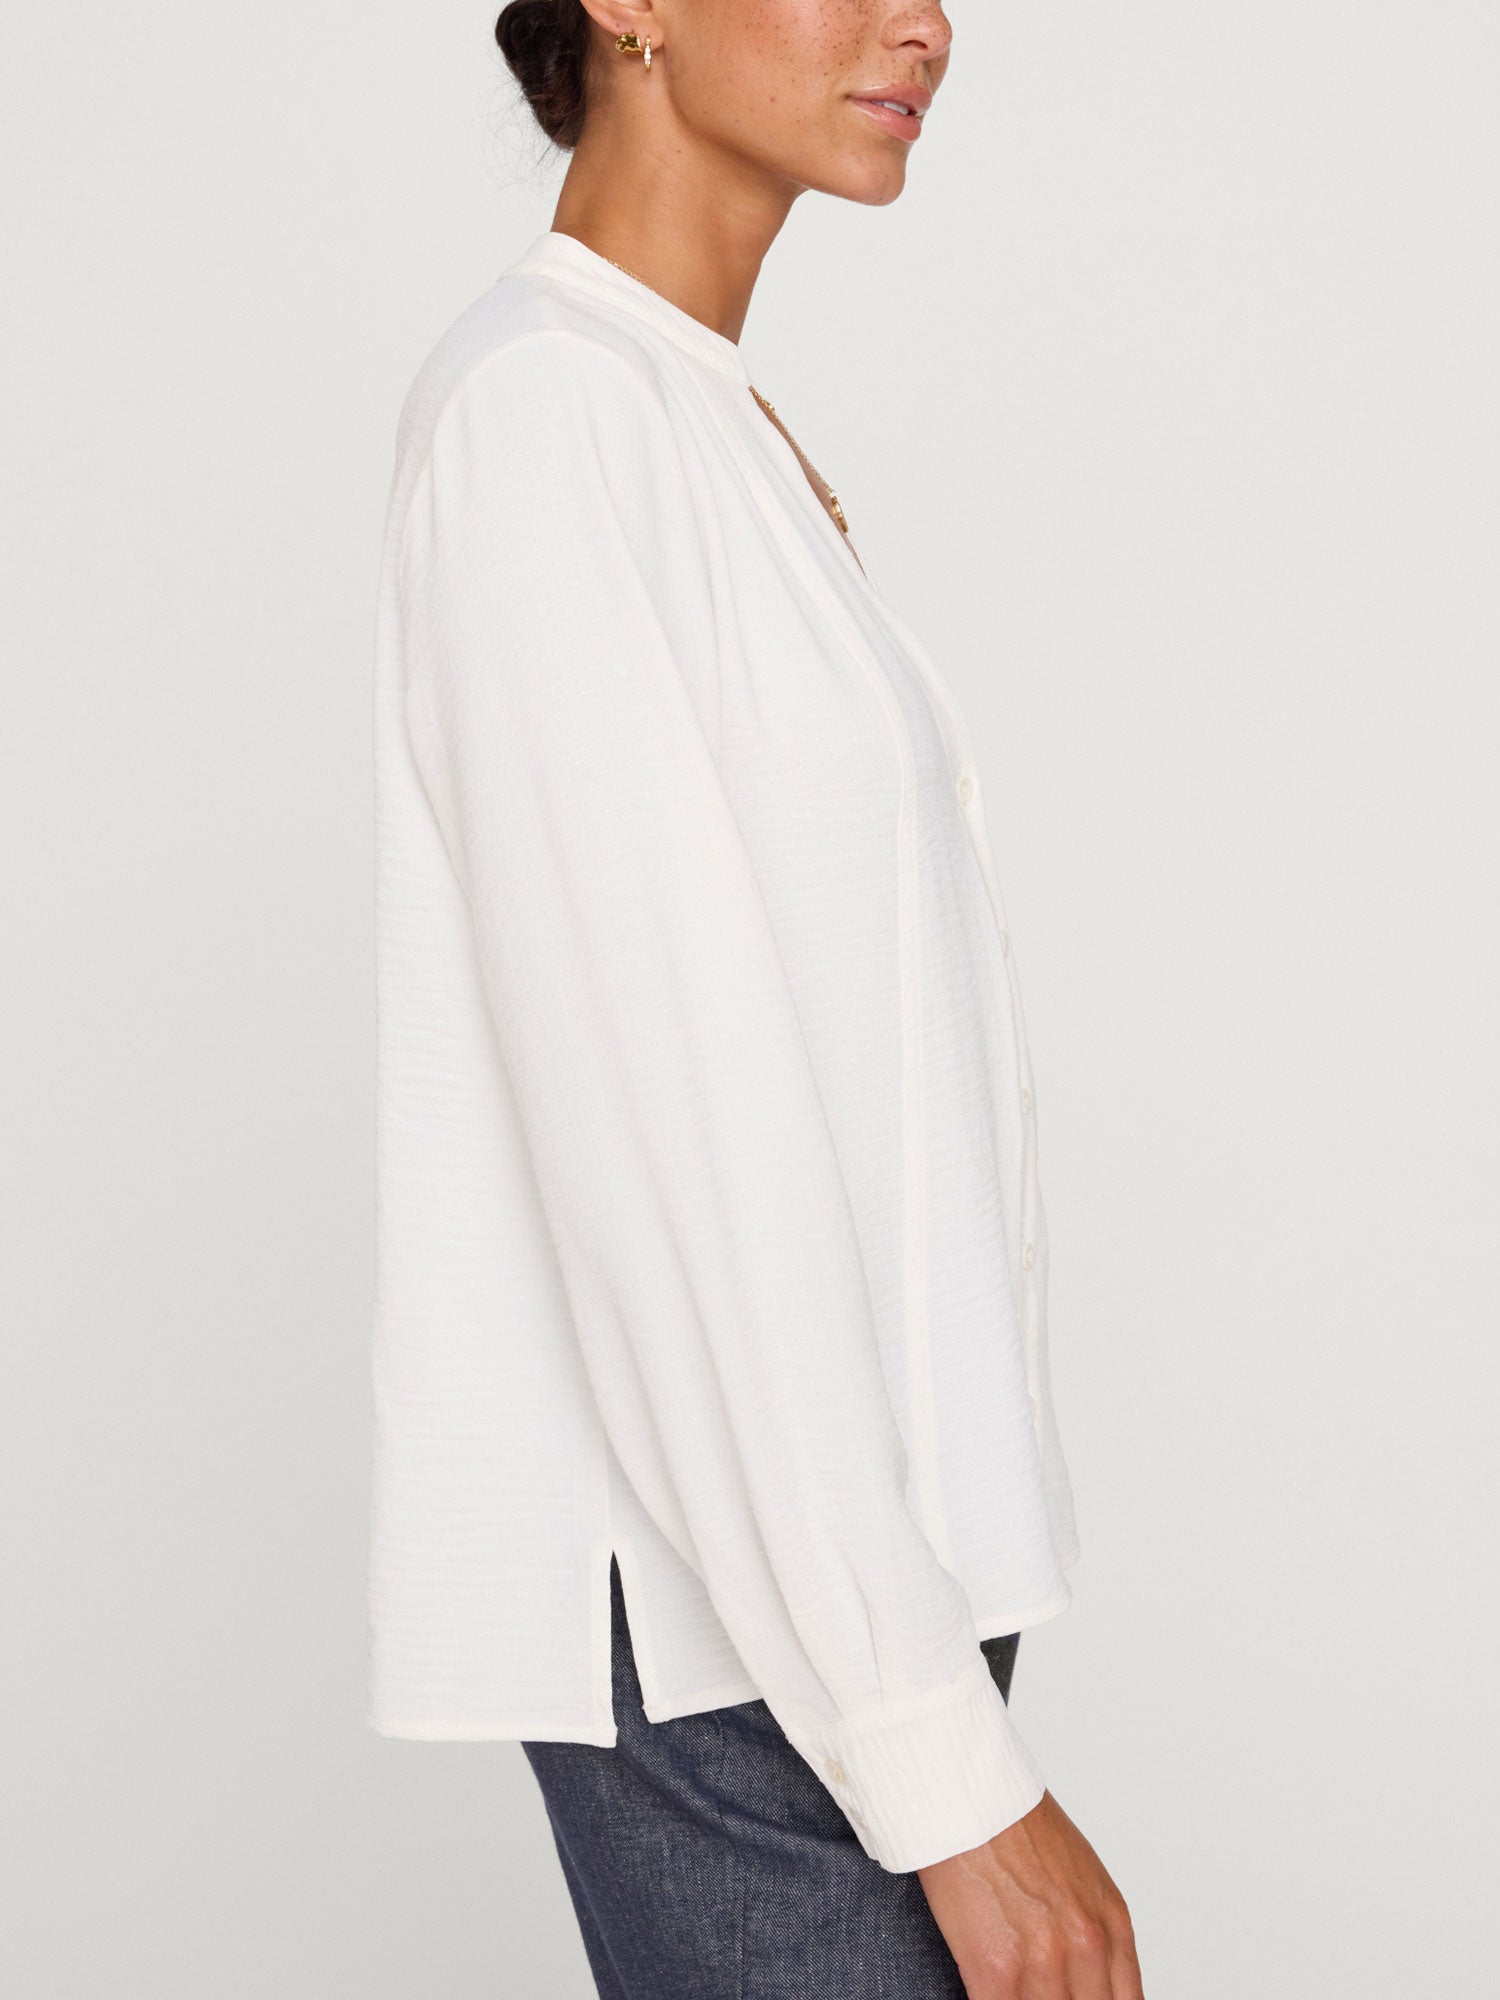 Galey button-down long sleeve white blouse side view